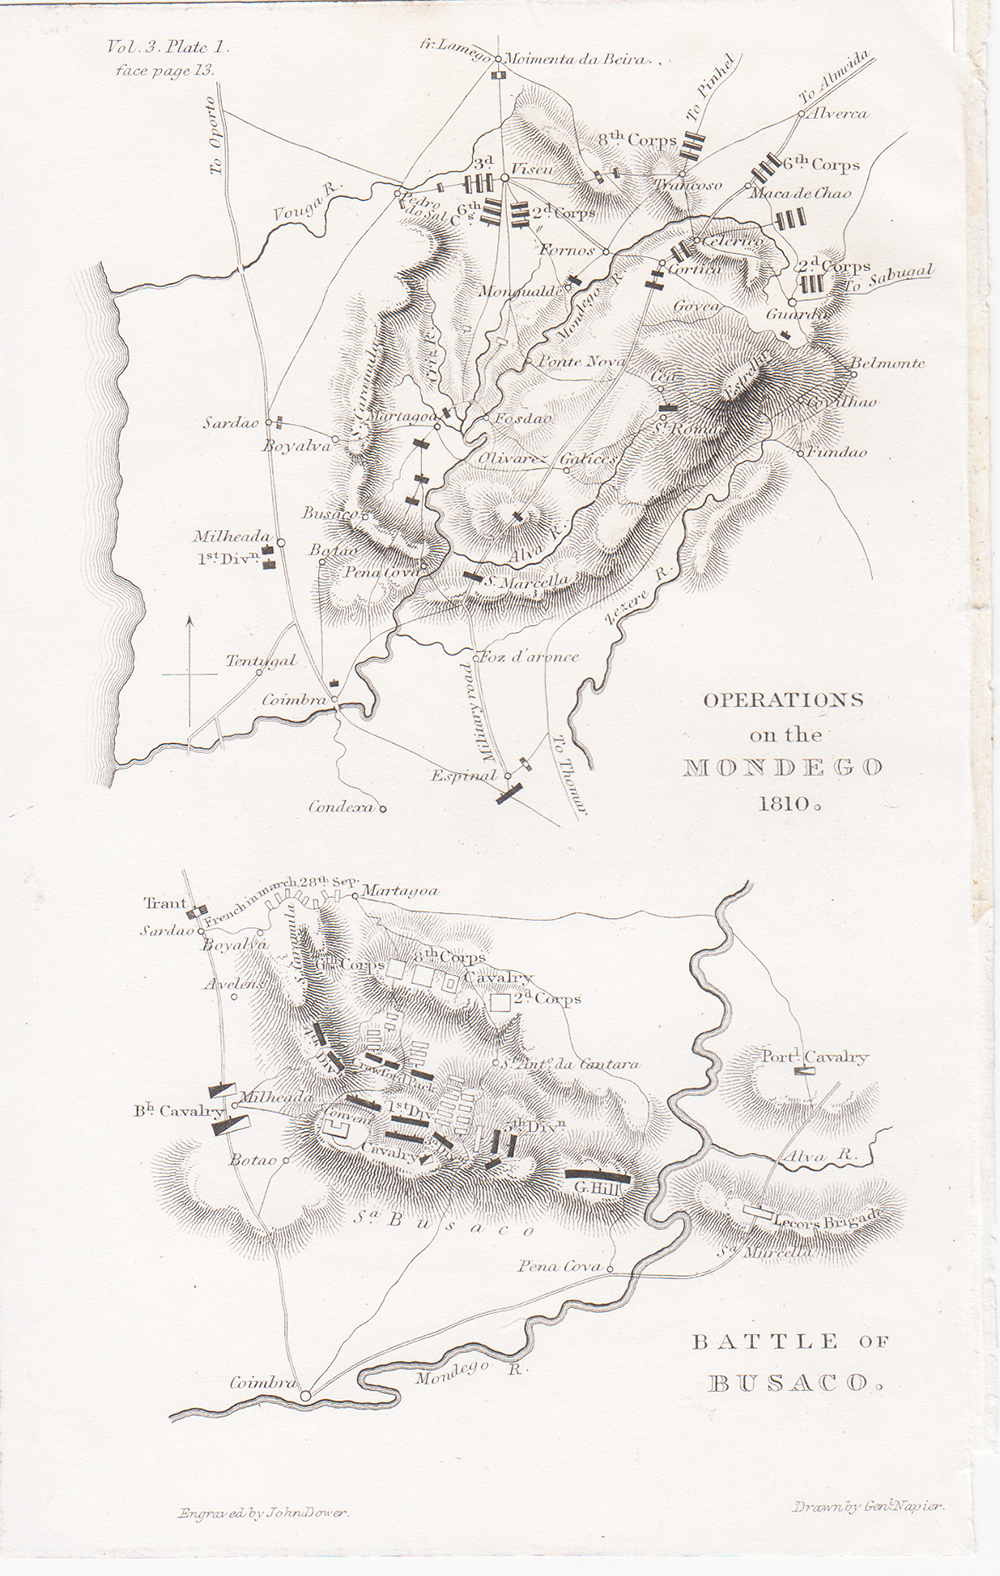 Operations on the Mondego 1810 and Battle of Busaco